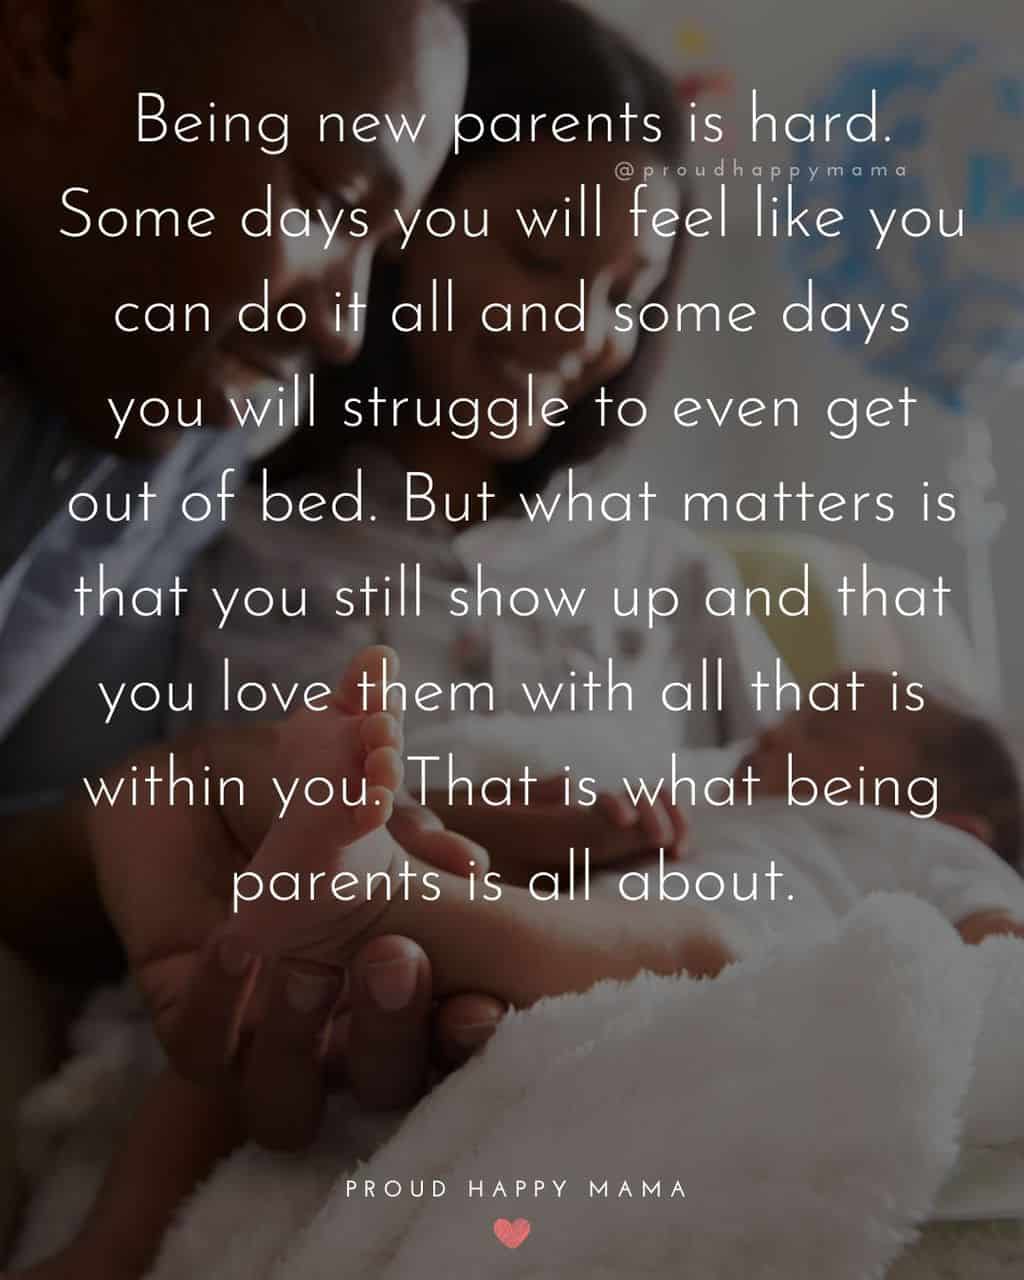 Quotes For New Parents - Being new parents is hard. Some days you will feel like you can do it all and some days you will struggle